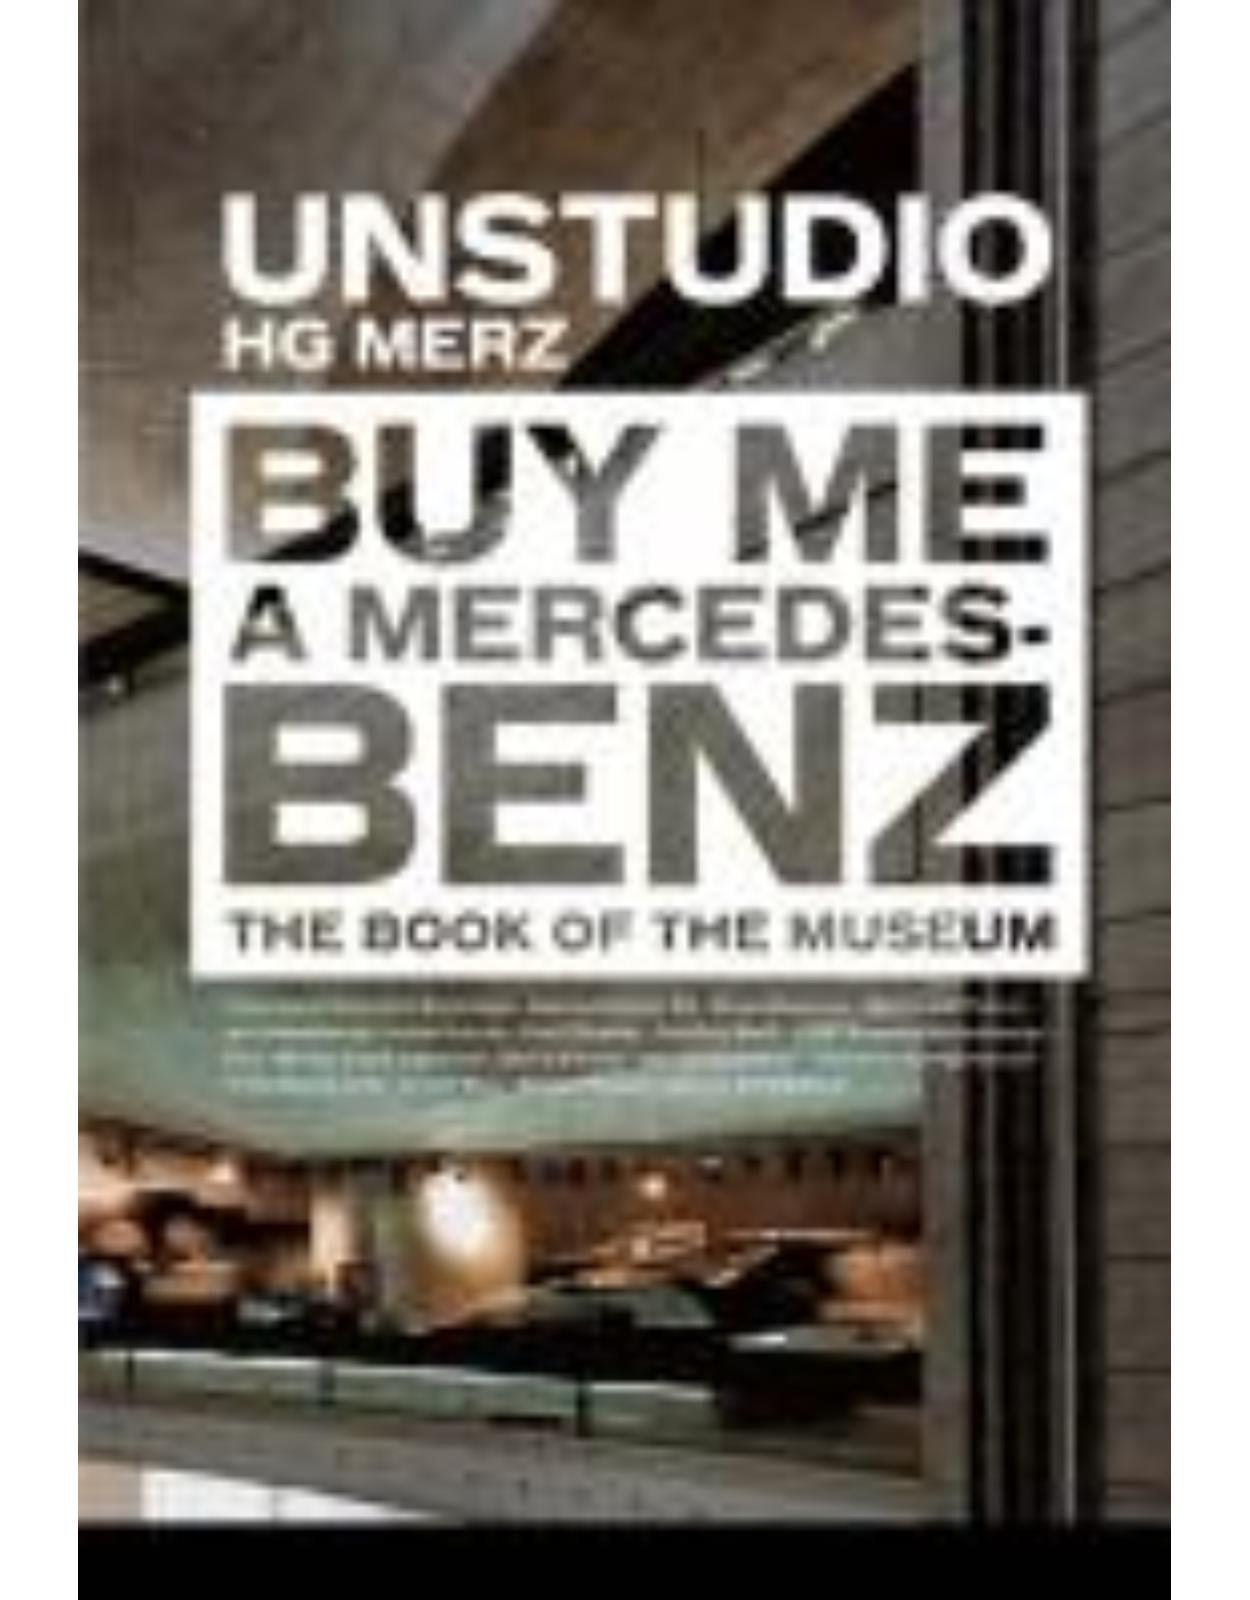 Buy Me a Mercedes-Benz: The Book of the Museum illustrated edition